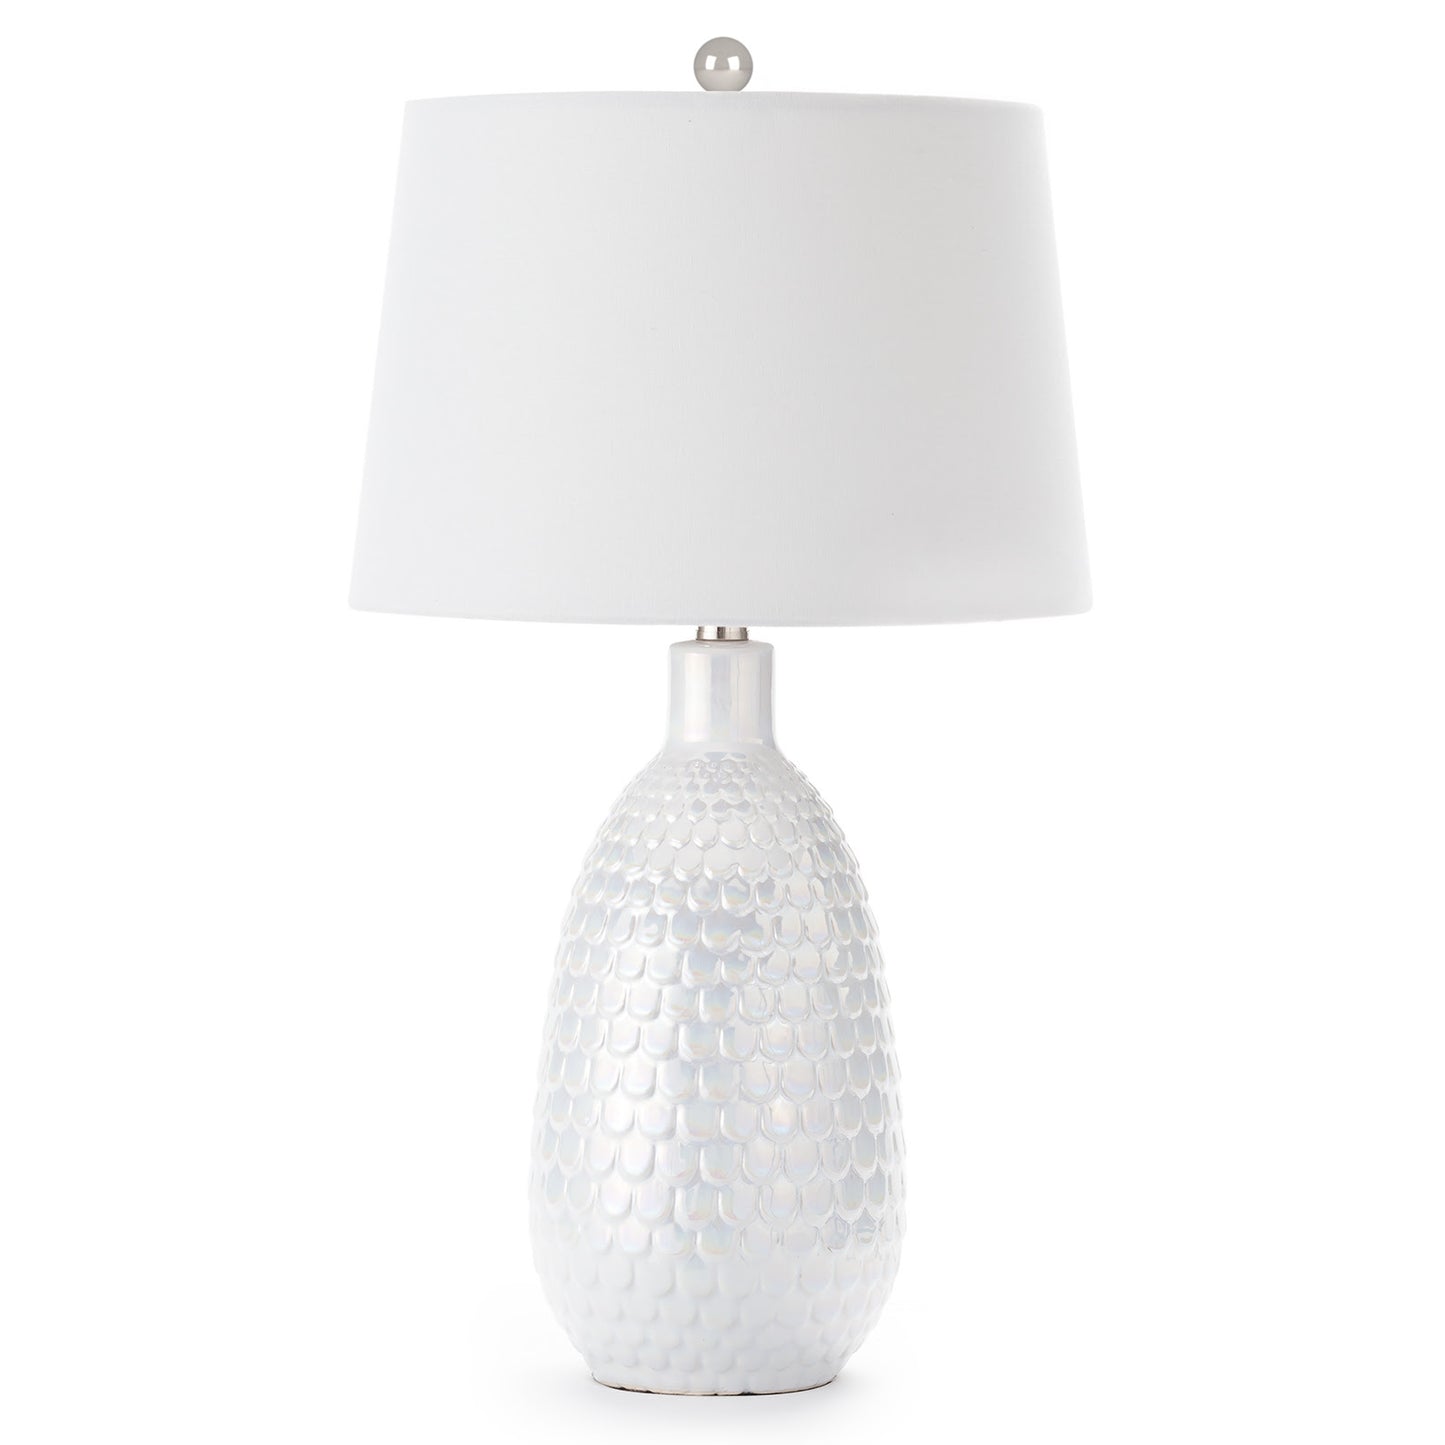 Glimmer Ceramic Table Lamp in Pearlized White by Coastal Living